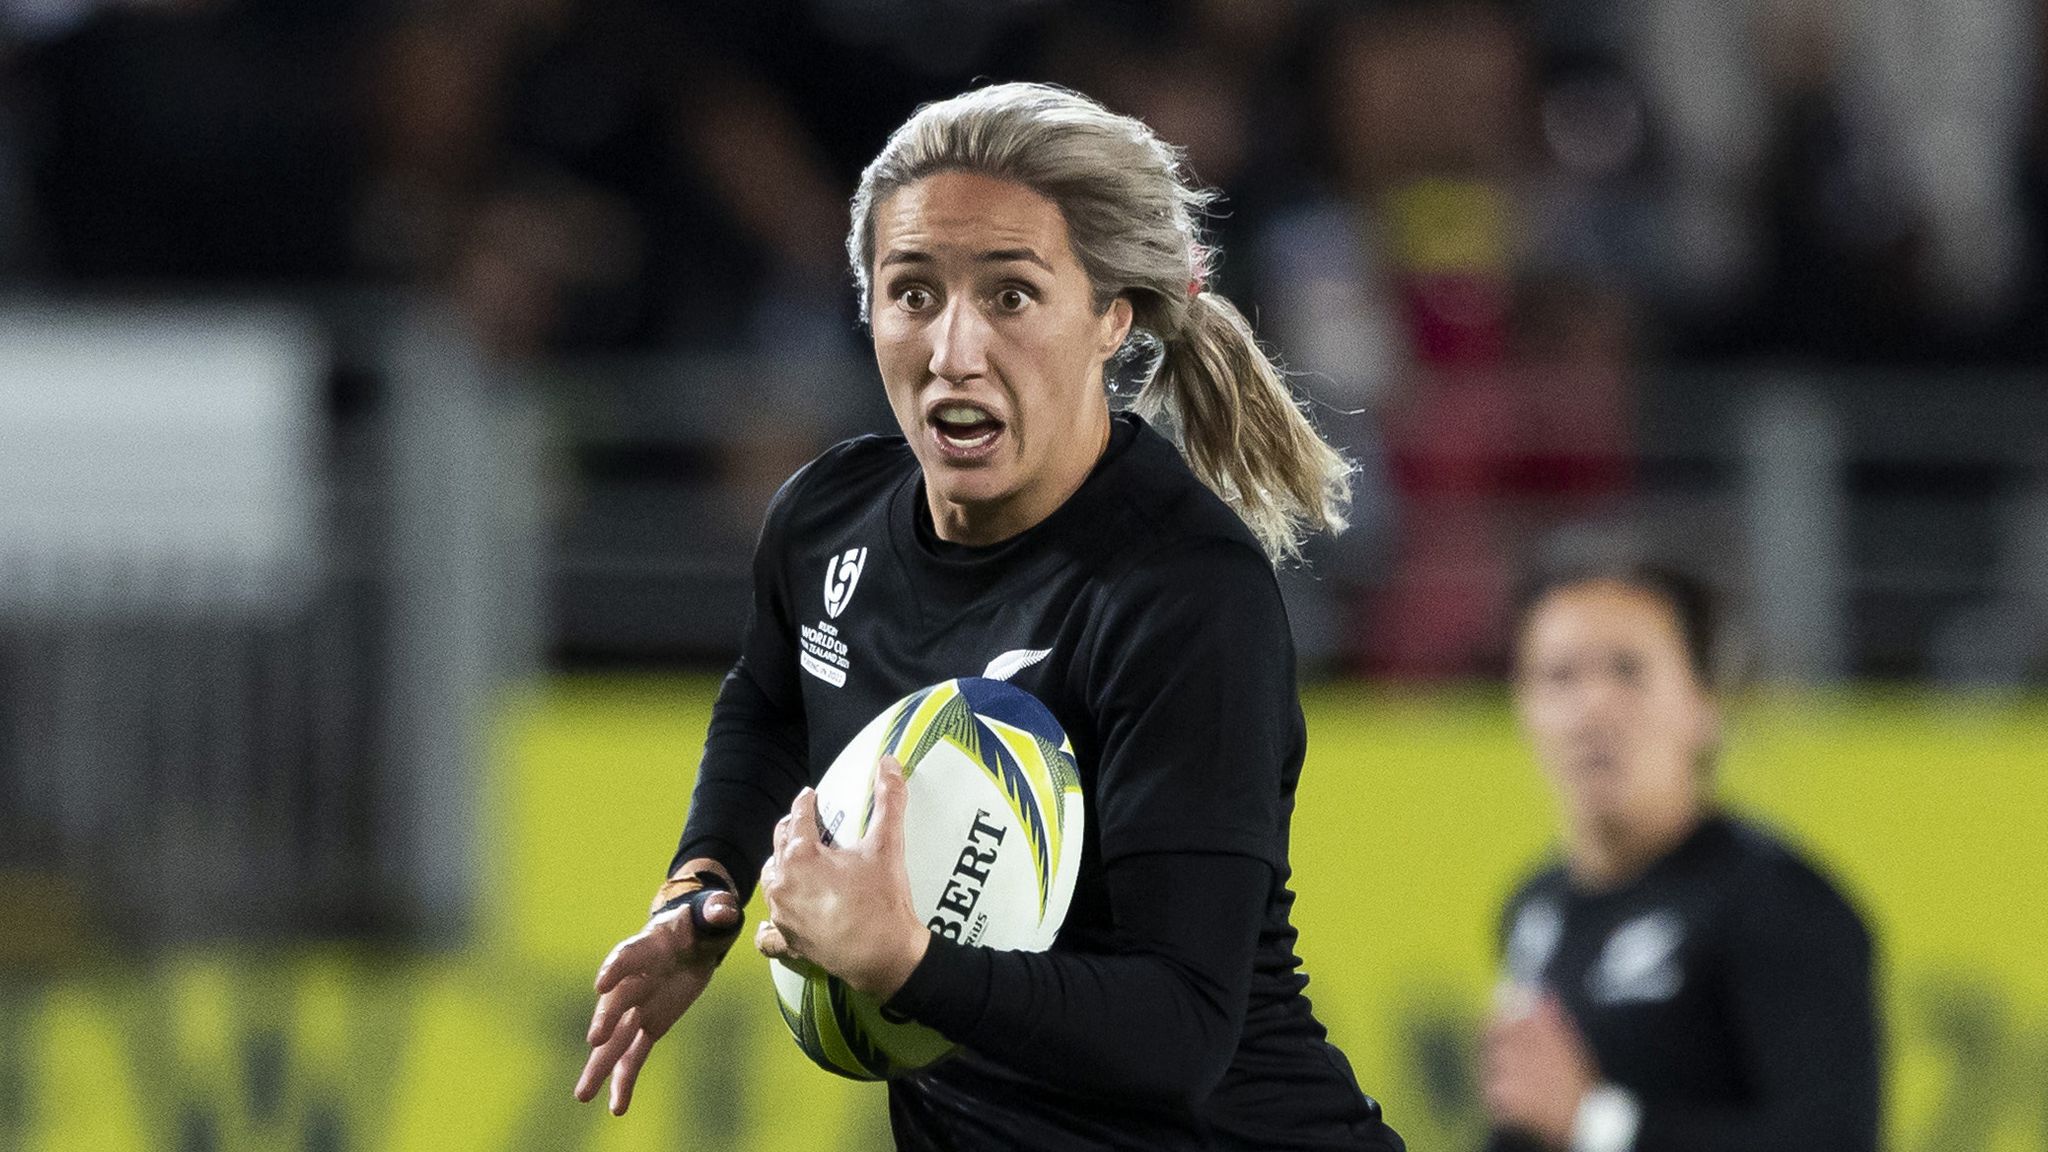 New Zealand 55-3 Wales Black Ferns knock Wales out of Rugby World Cup at quarter-final stage Rugby Union News Sky Sports